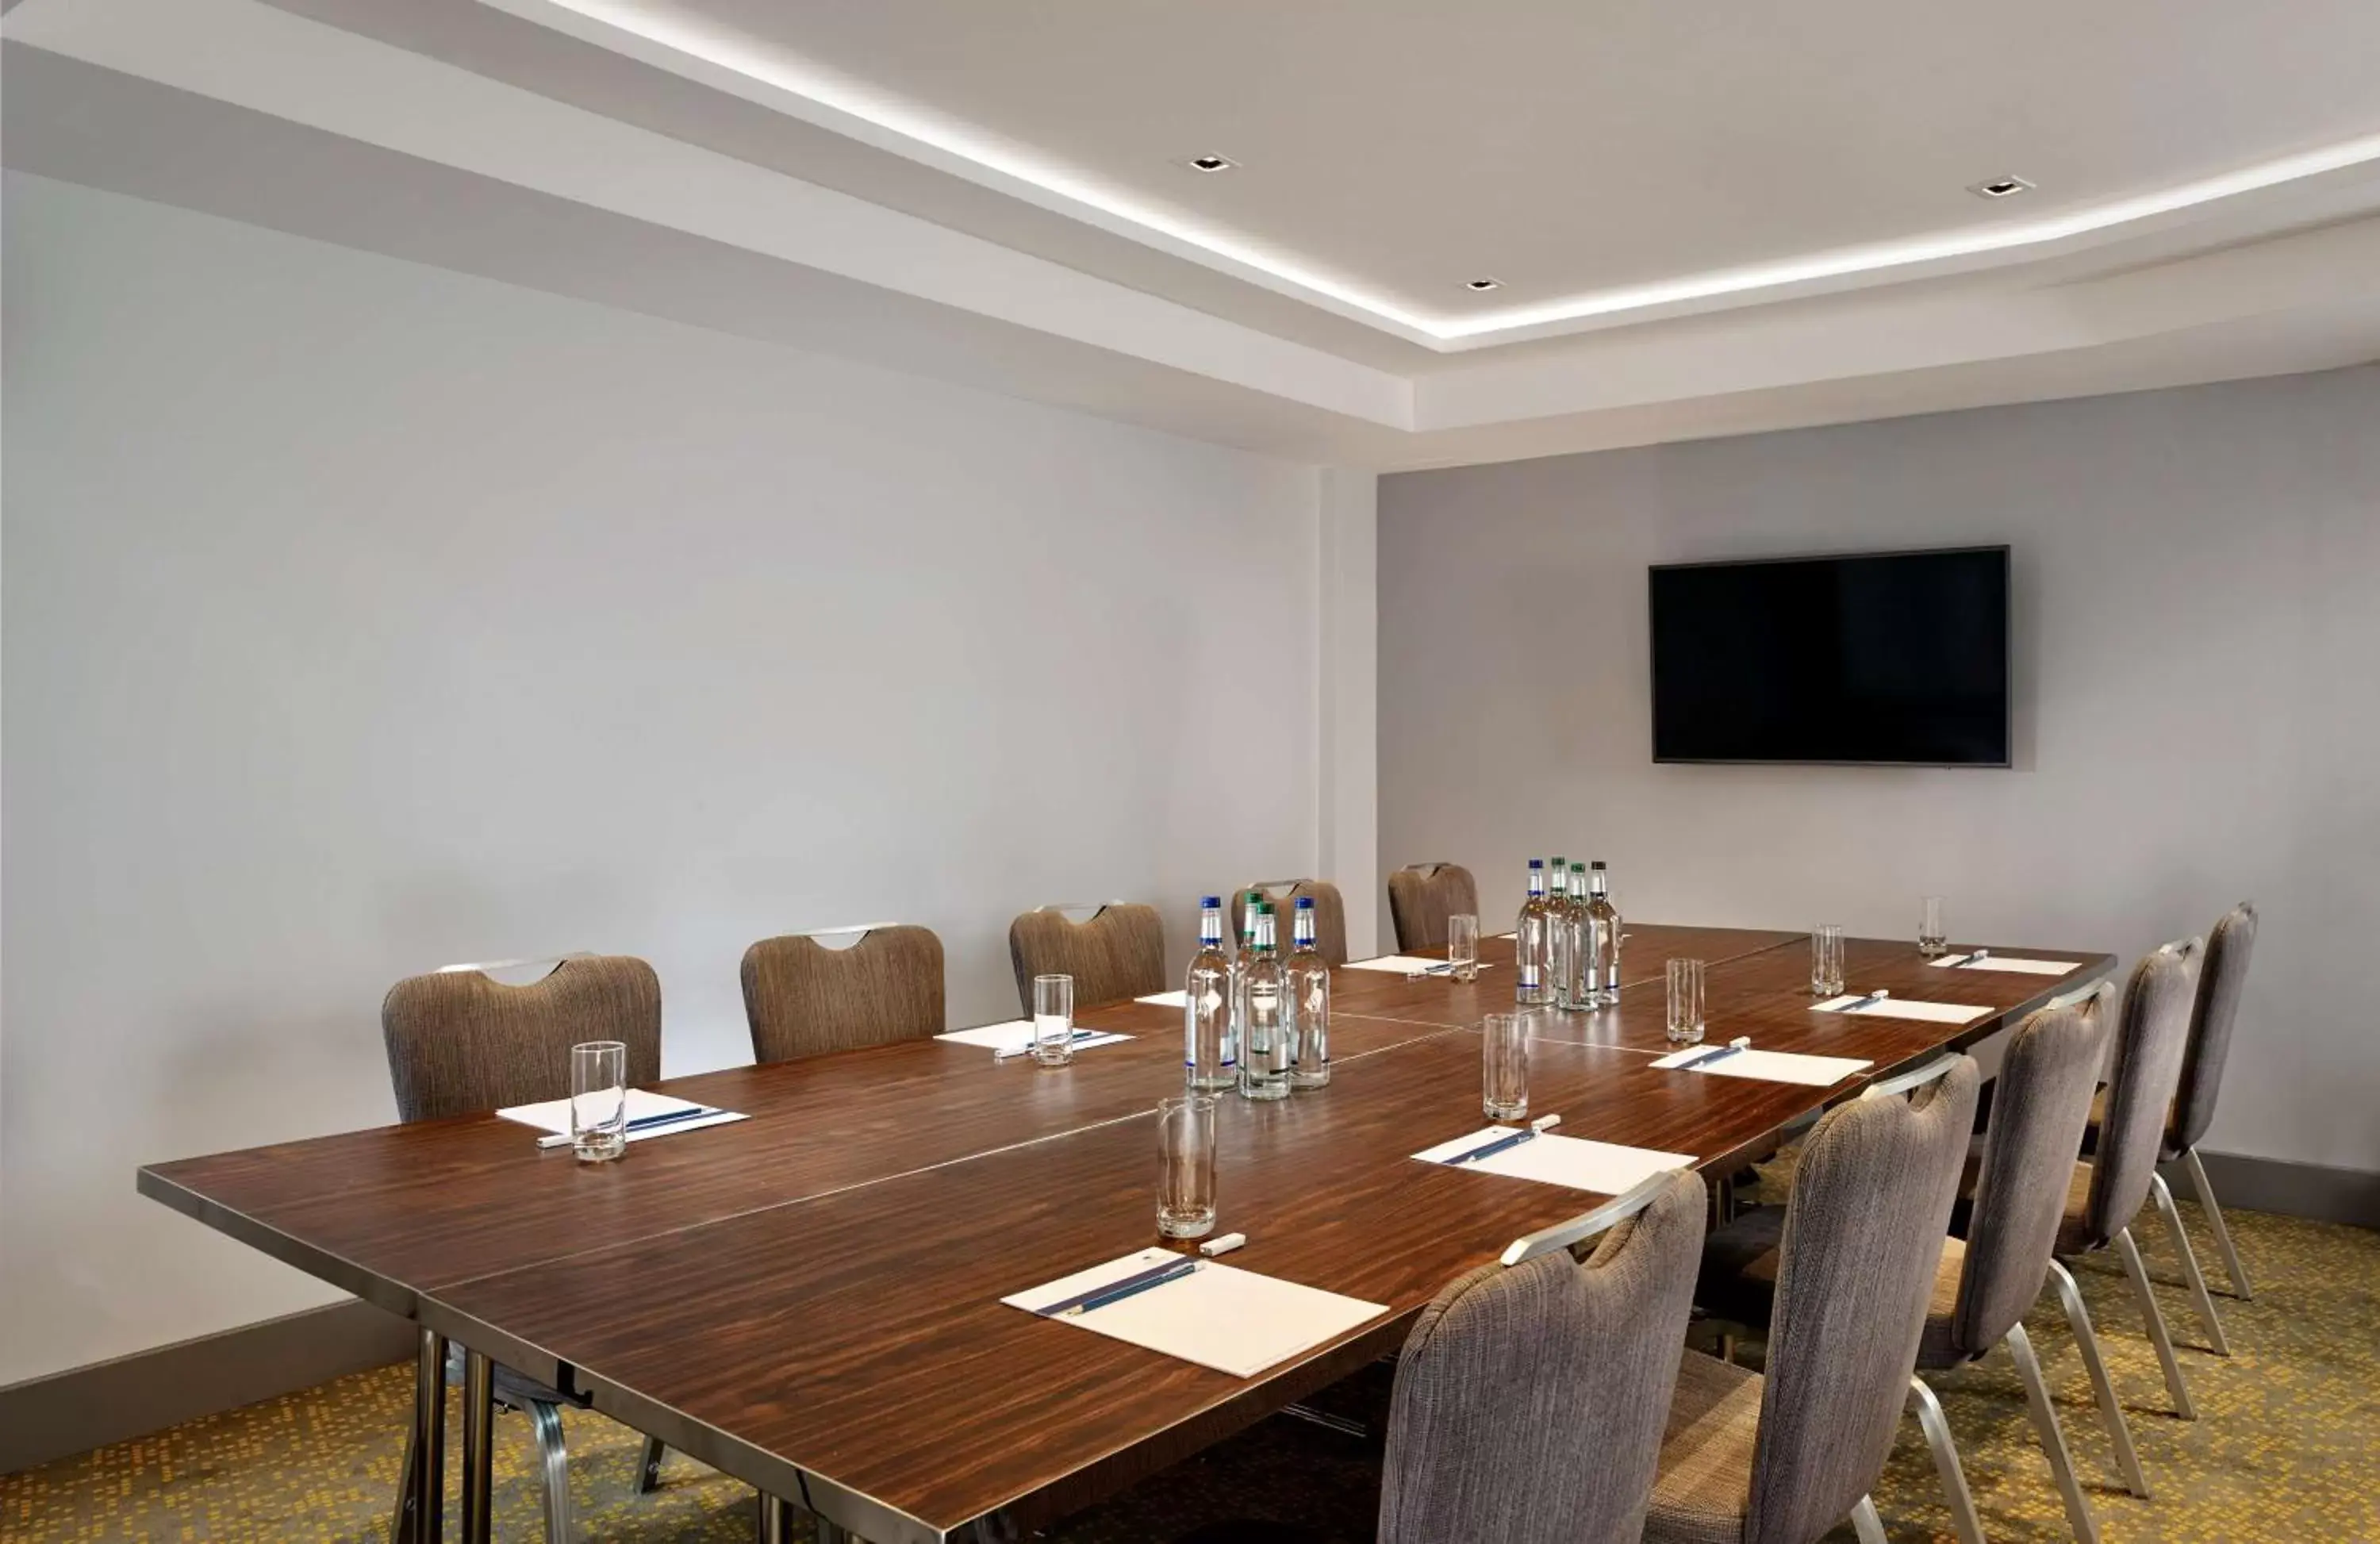 Meeting/conference room in Park Plaza Victoria London